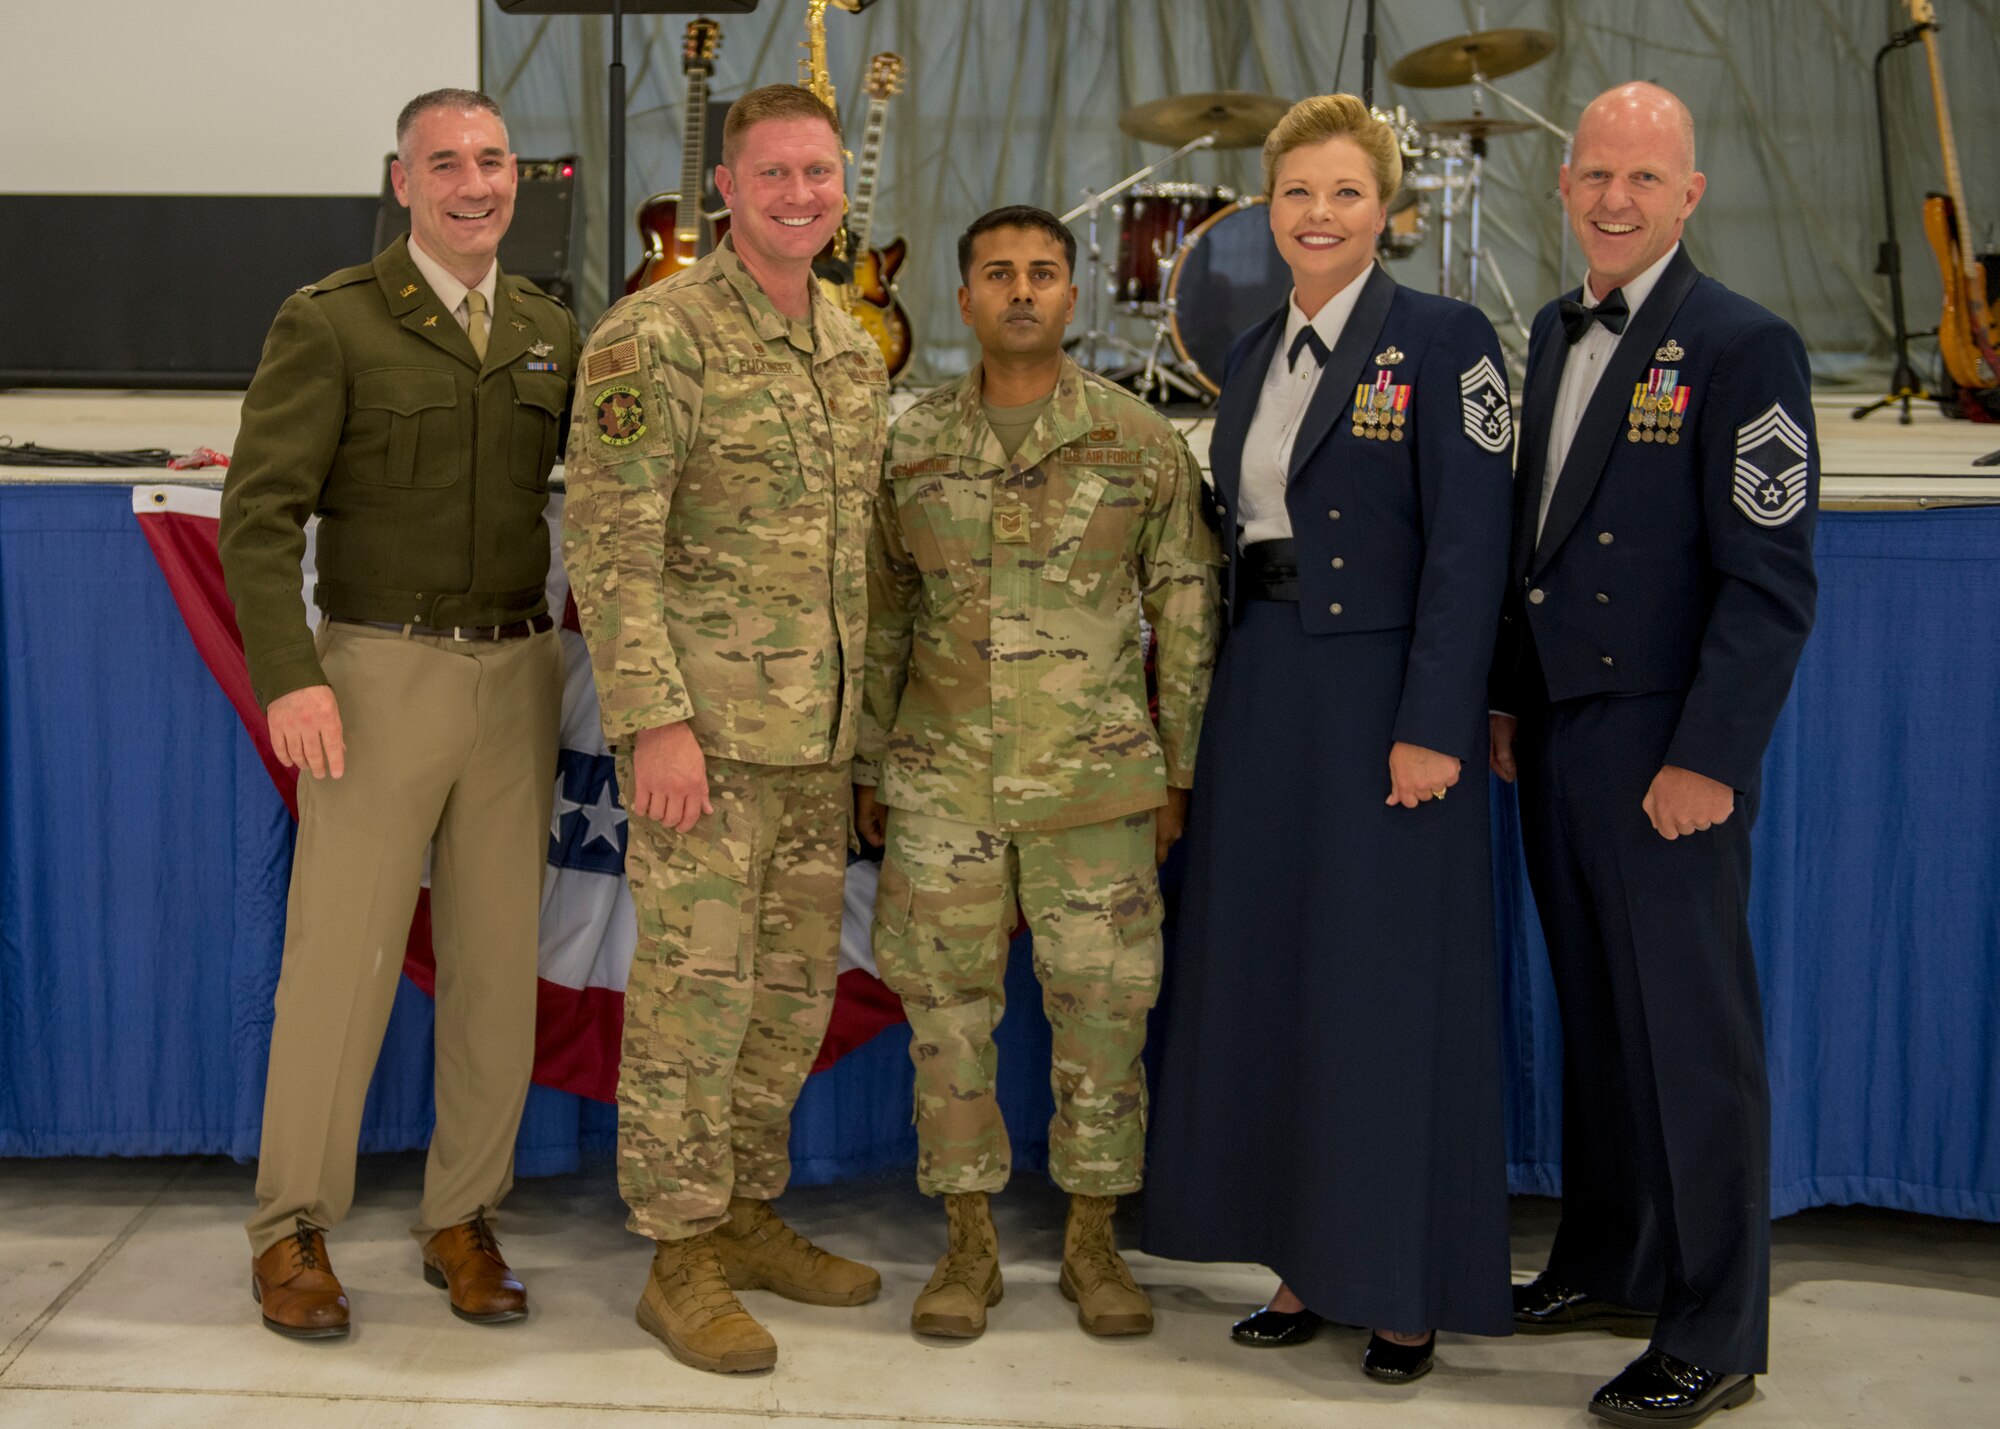 Newly promoted Tech Sgt. Denzel Ramdhanie, 49th Component Maintenance Squadron avionics back shop production non-commissioned officer in charge, poses for a photo with base leadership at the Air Force Ball, Sept. 14, 2019, on Holloman Air Force Base, N.M. Ramdhanie promoted from staff sergeant to technical sergeant through the Stripes for Exceptional Performers program. (U.S. Air Force photo by Airman 1st Class Kindra Stewart)